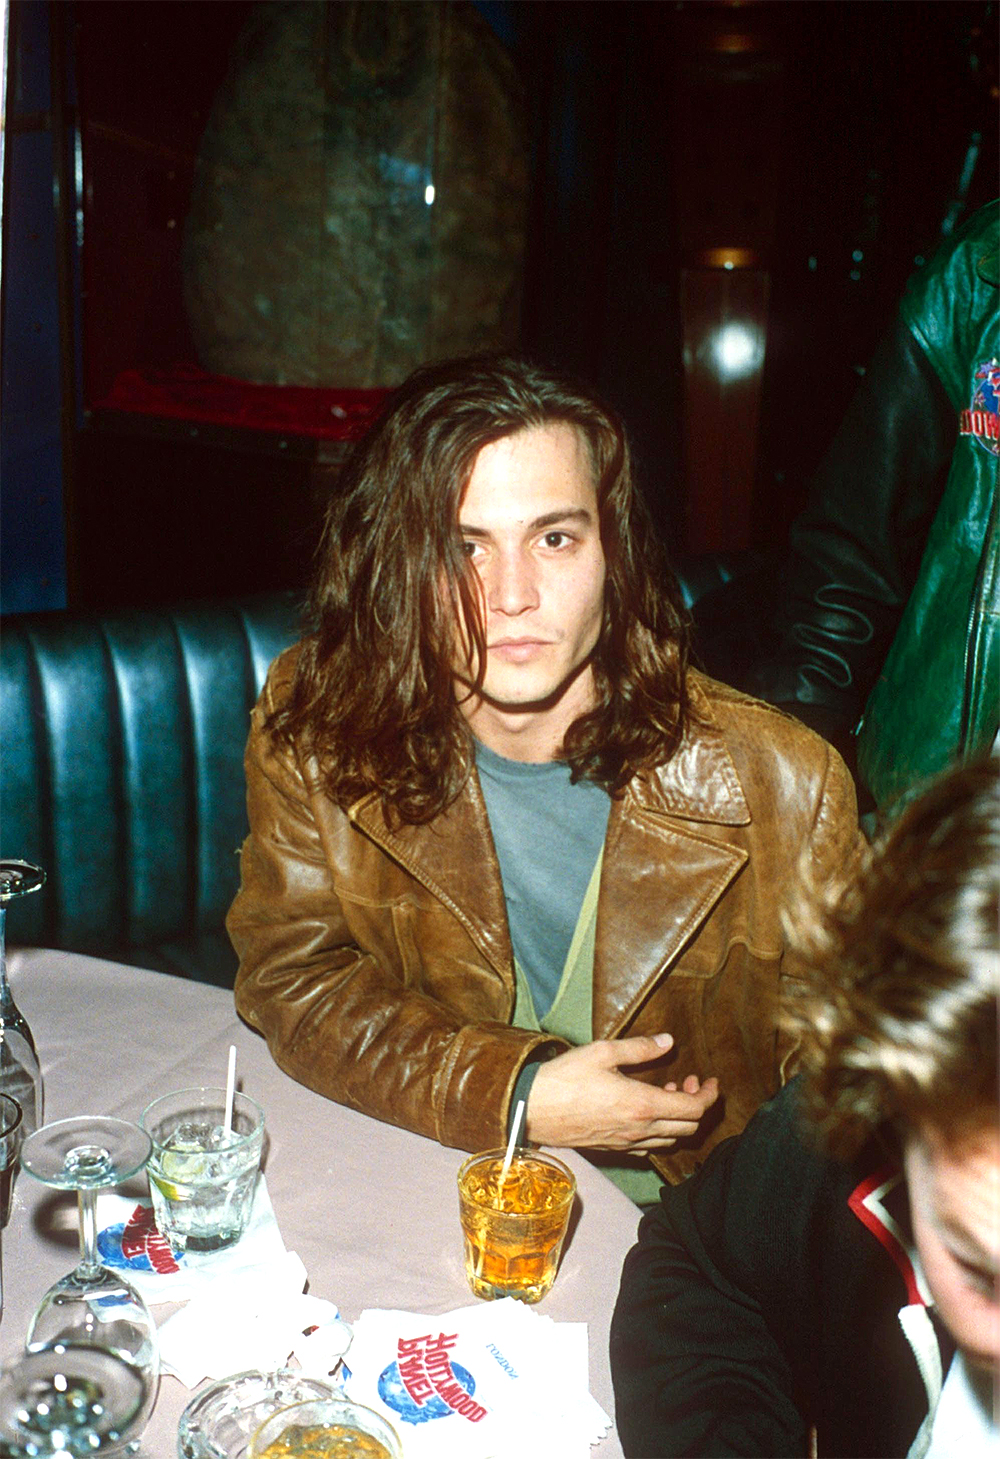 <p>Johnny Depp, seen here sporting his hair from ‘What’s Eating Gilbert Grape’ while at Planet Hollywood in London, Britain, portrayed the title character in the 1993 movie that also featured Darlene Crates, Juliette Lewis, and a 19-year-old Leonardo DiCaprio. It was a well-received movie, bolstered by the soundtrack that featured The Lemonheads’ ‘It’s A Shame About Ray.’</p>